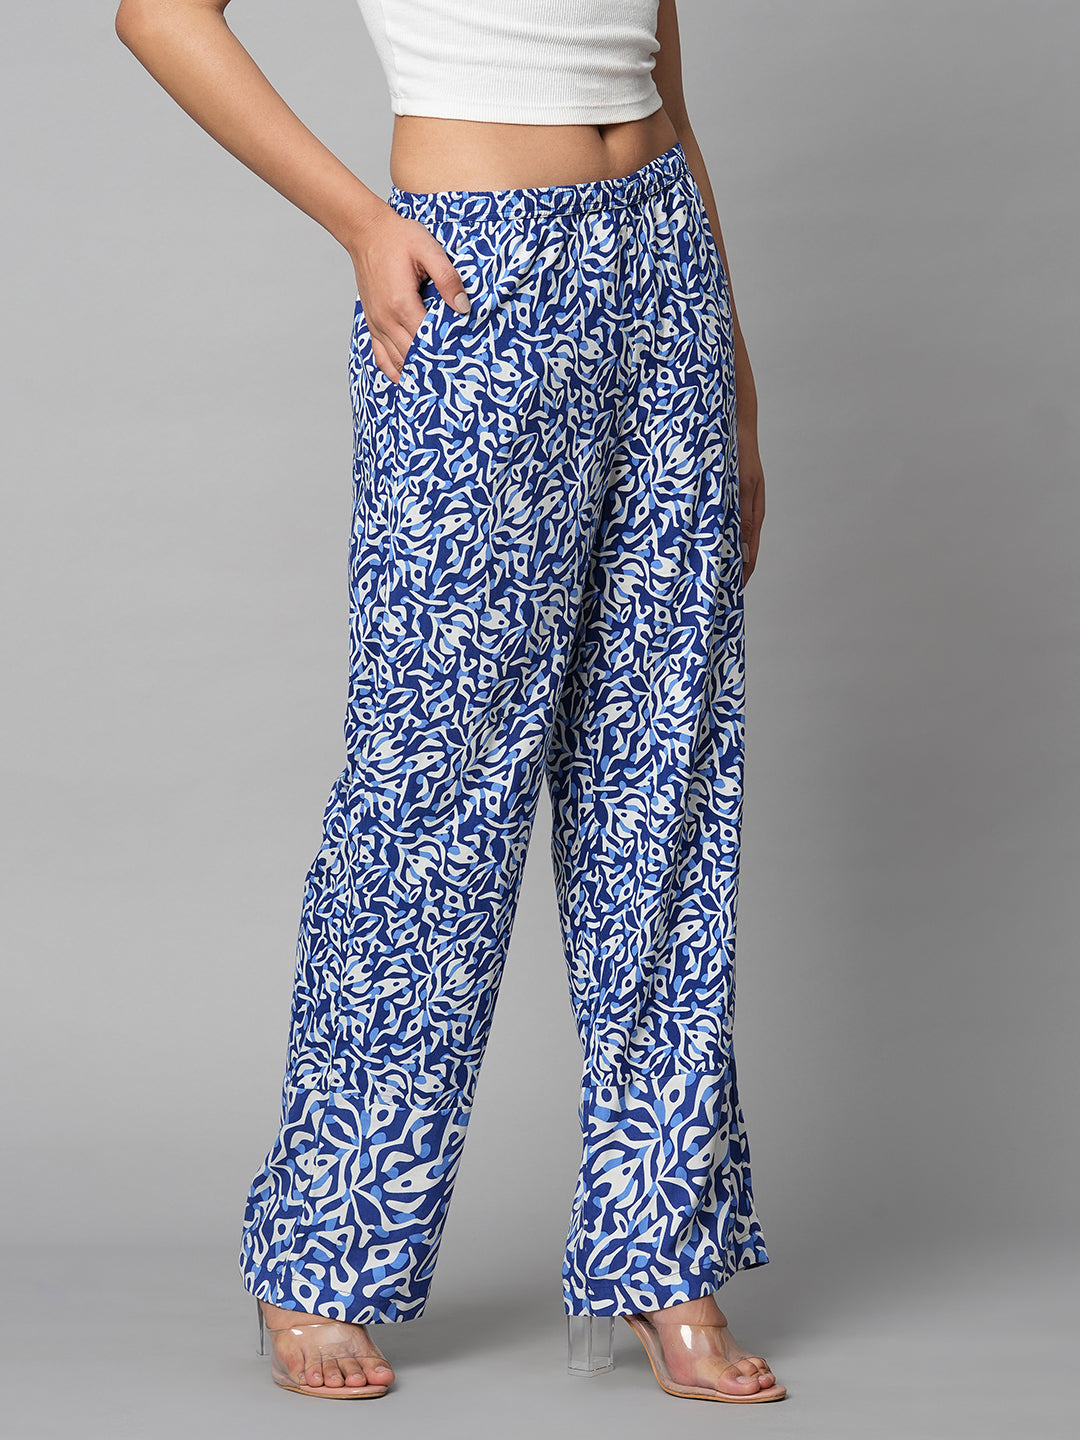 MIX N MATCH RAYON PRINTED PULL ON FLUID PANTS